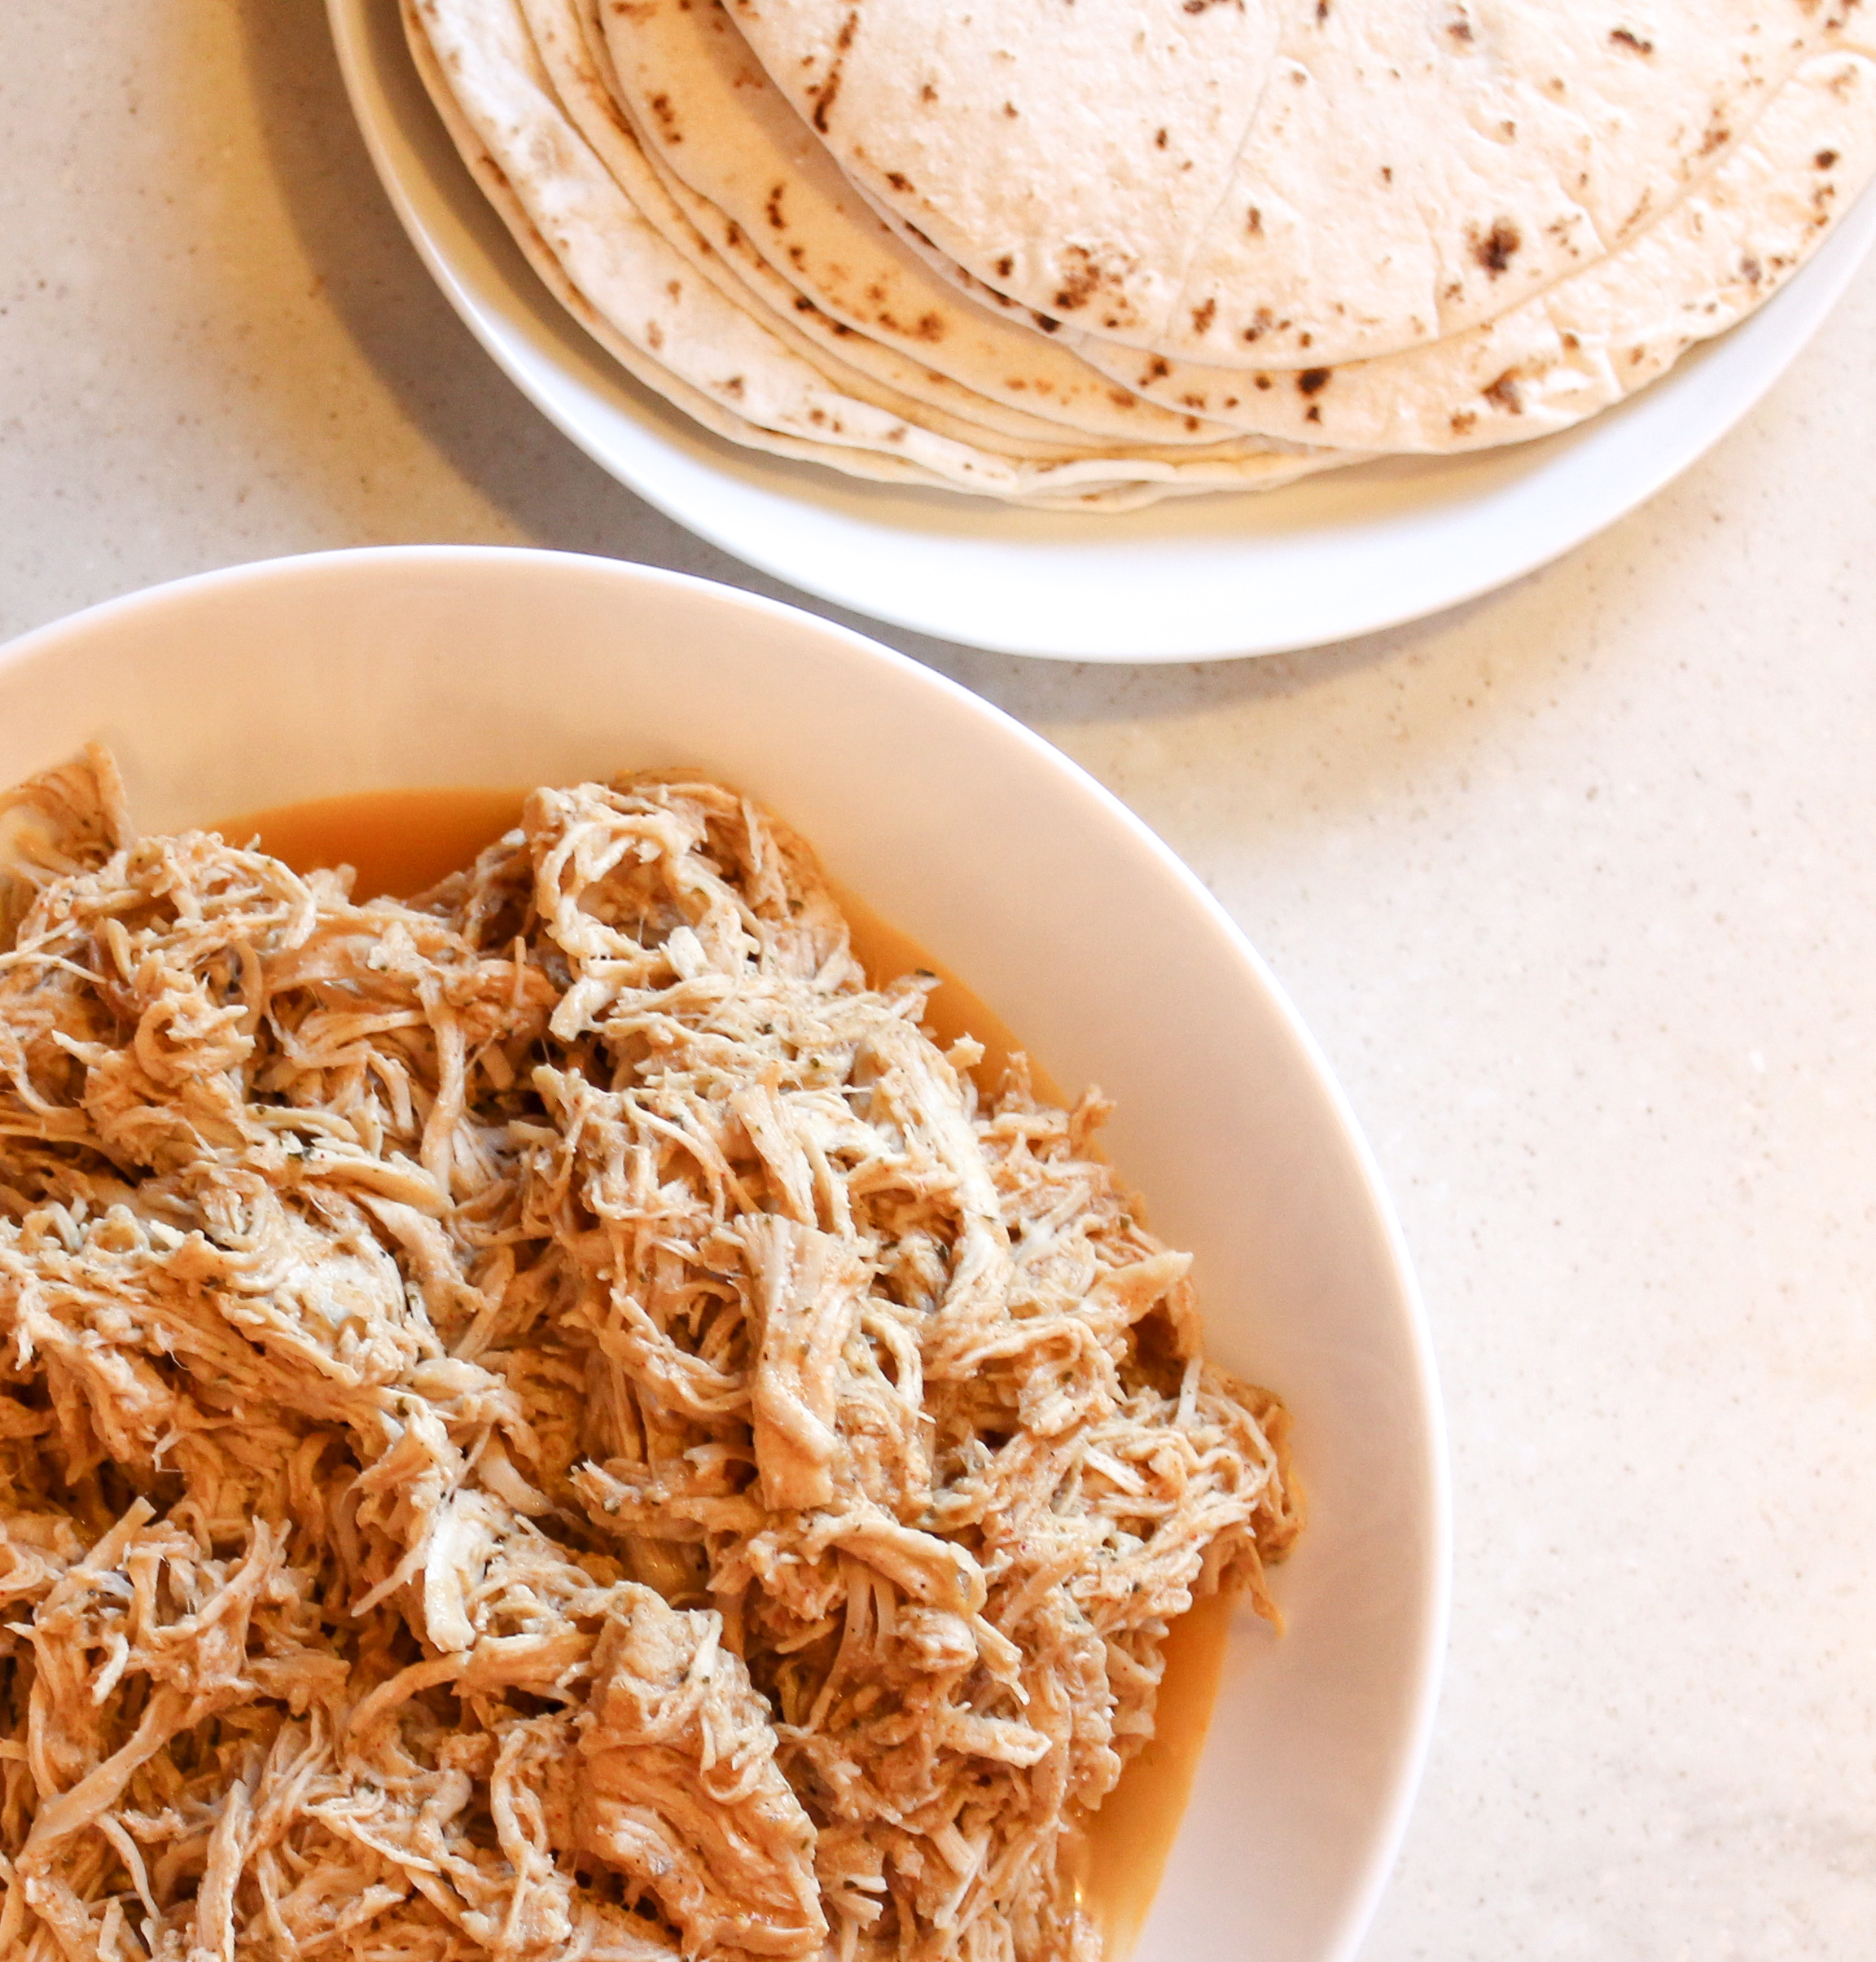 shredded chicken in a white bowl with a plate or tortillas beside the chicken